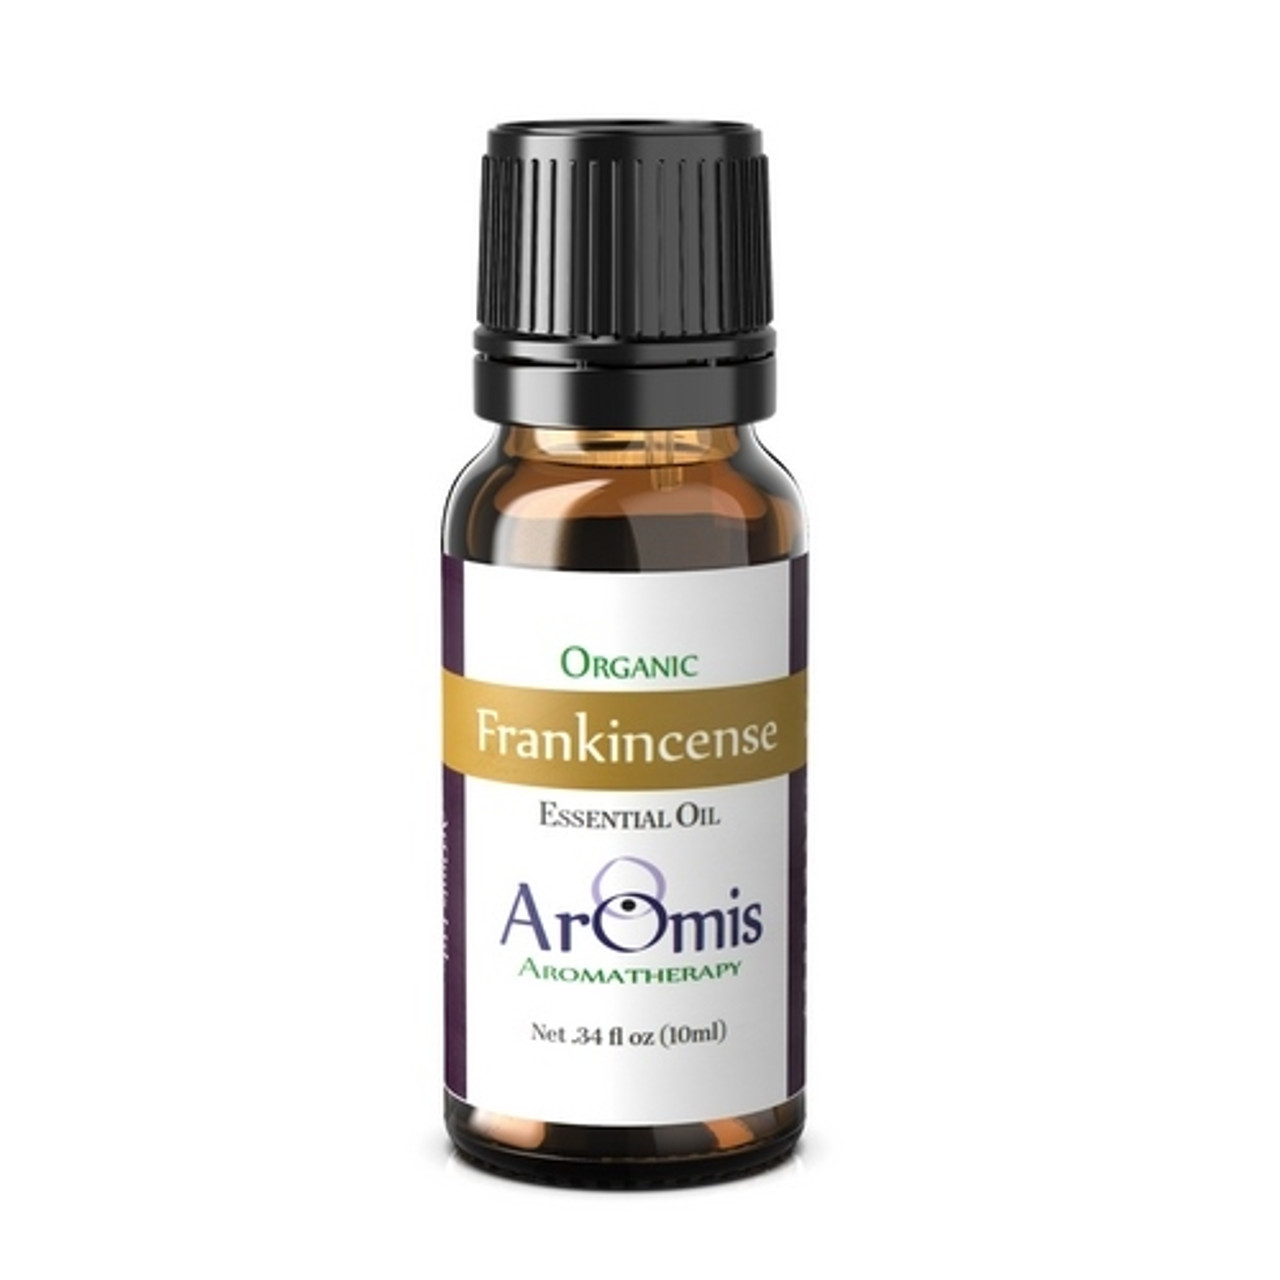 Frankincense Benefits and Usages. Aroma Therapy available at